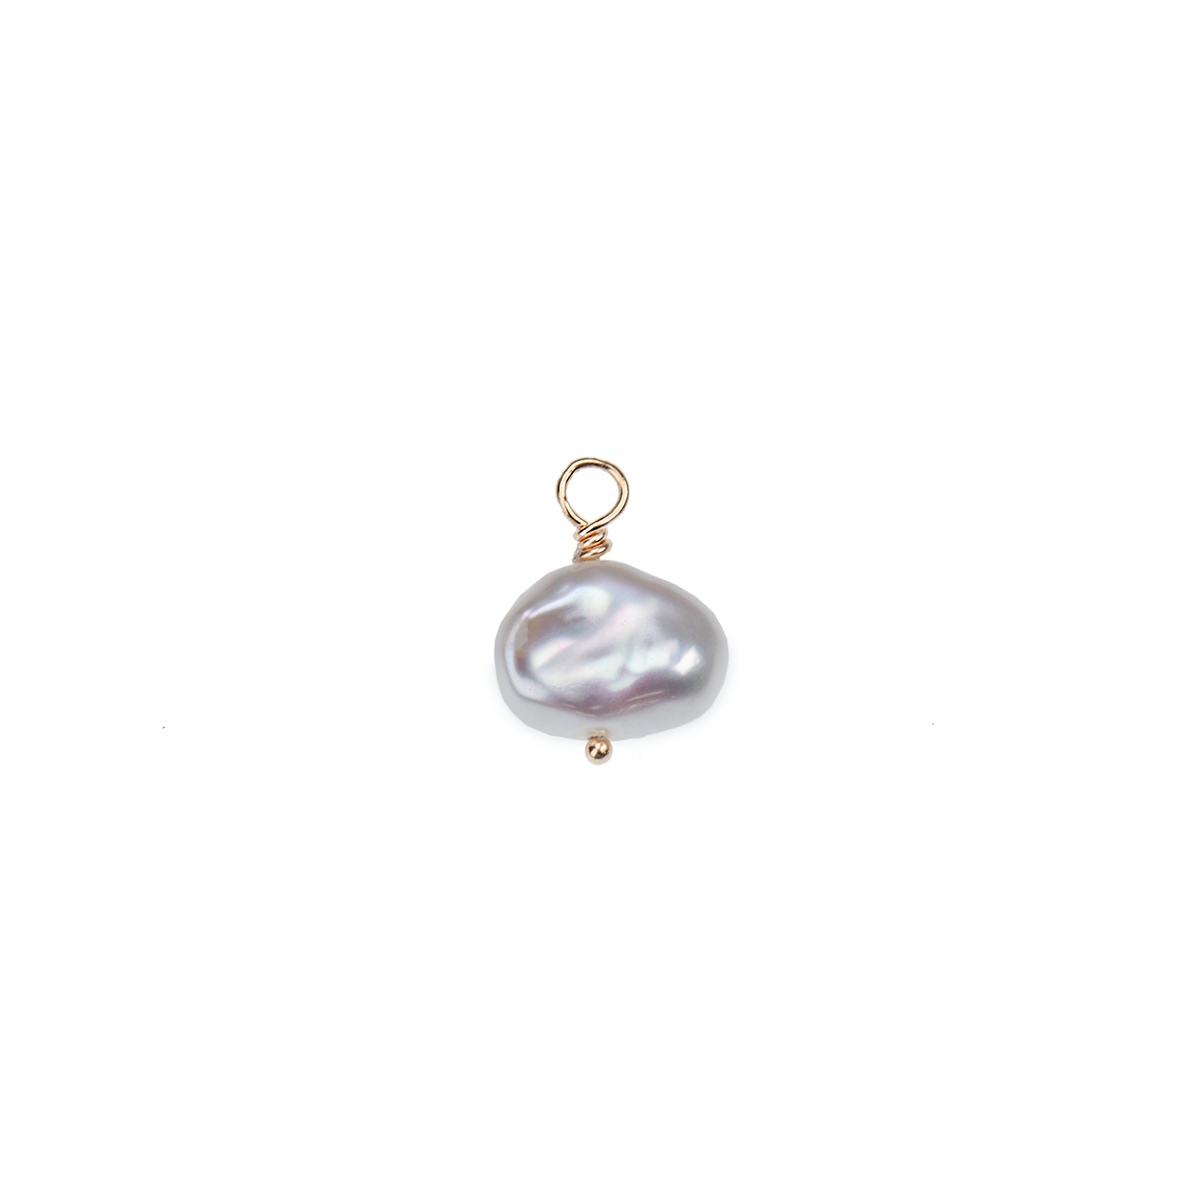 Image of Pearl charm from Emilia by Bon Dep